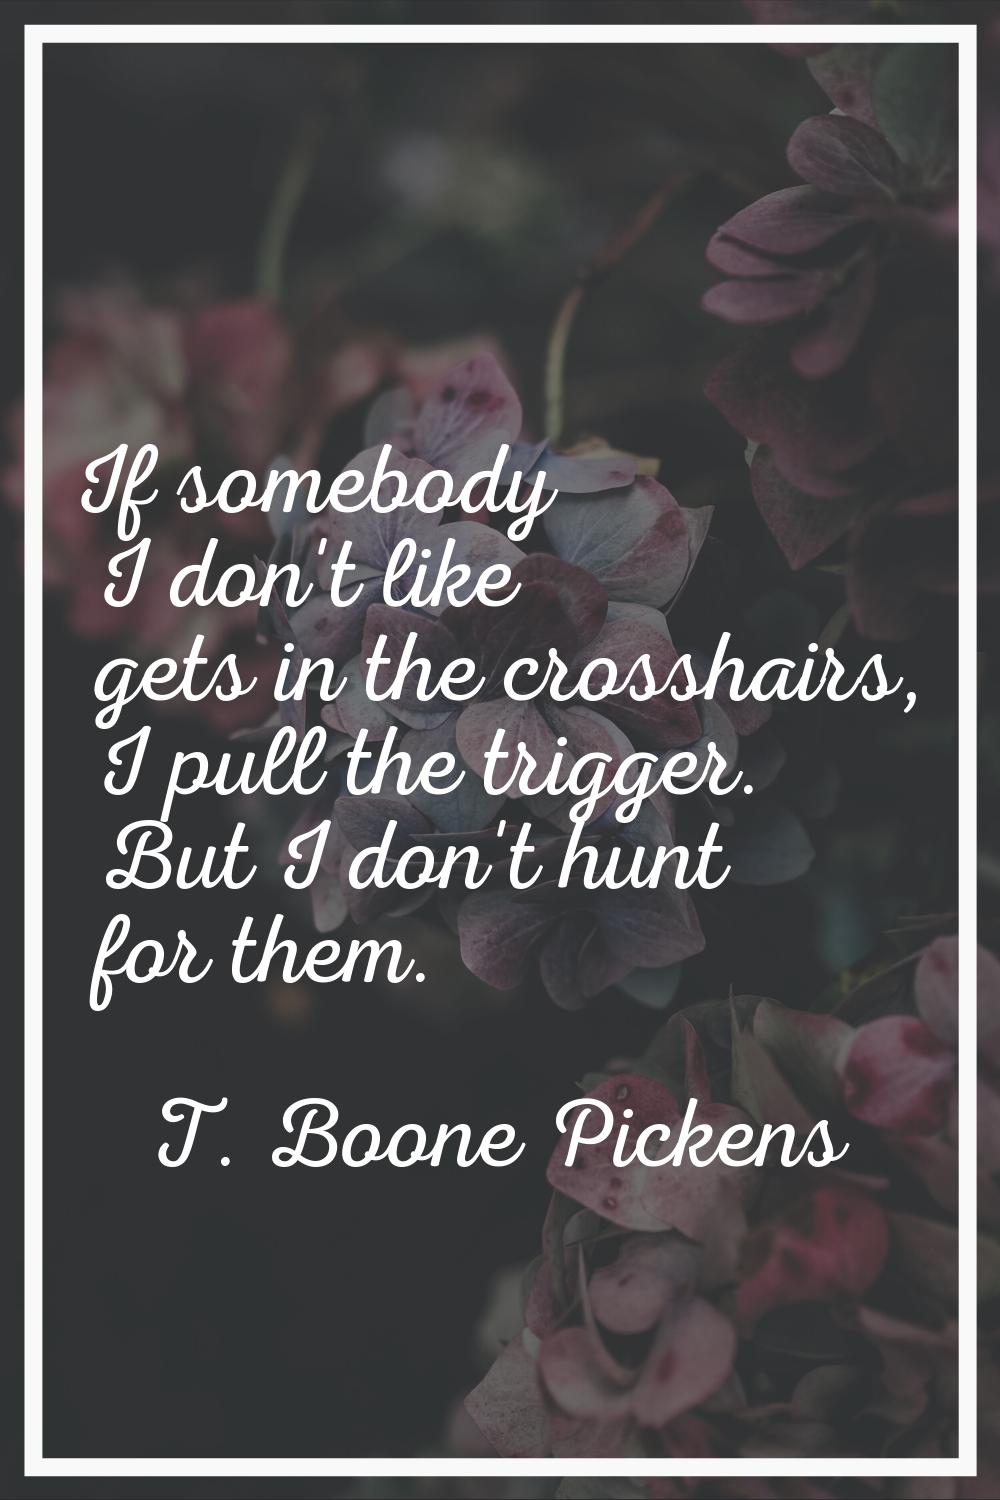 If somebody I don't like gets in the crosshairs, I pull the trigger. But I don't hunt for them.